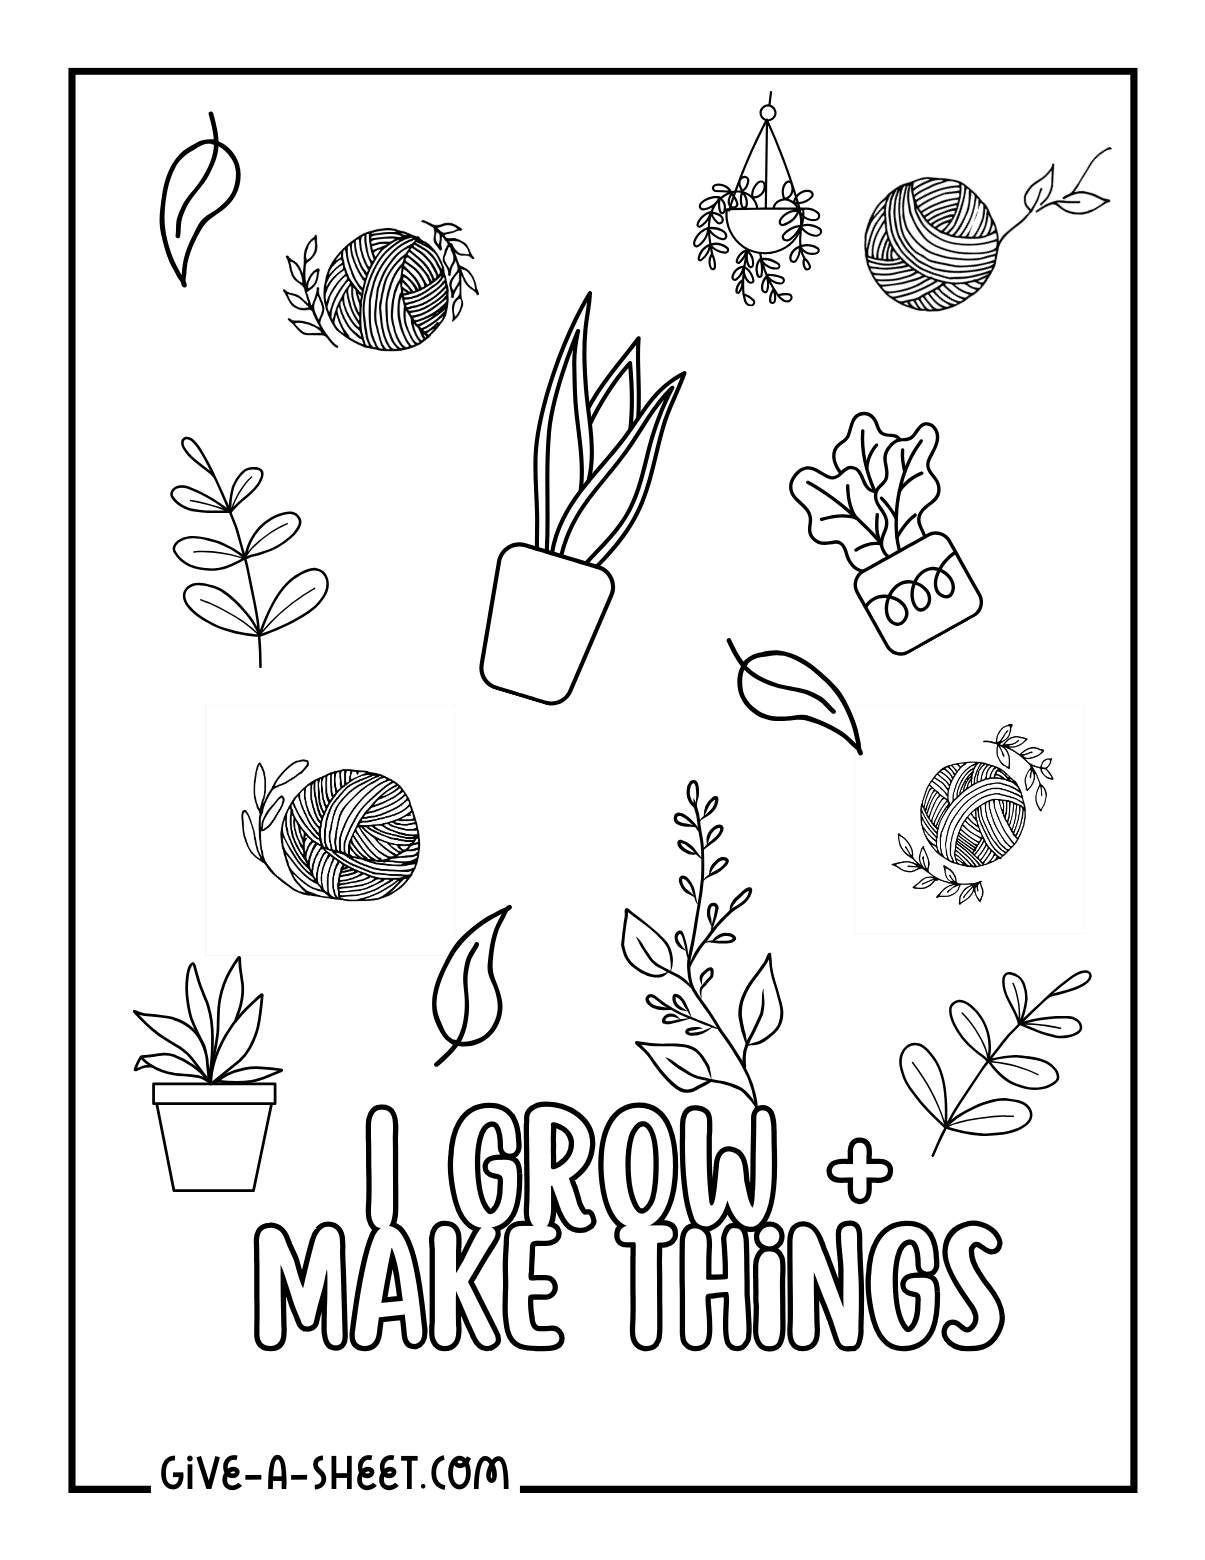 Make and do DIY crafts coloring page.